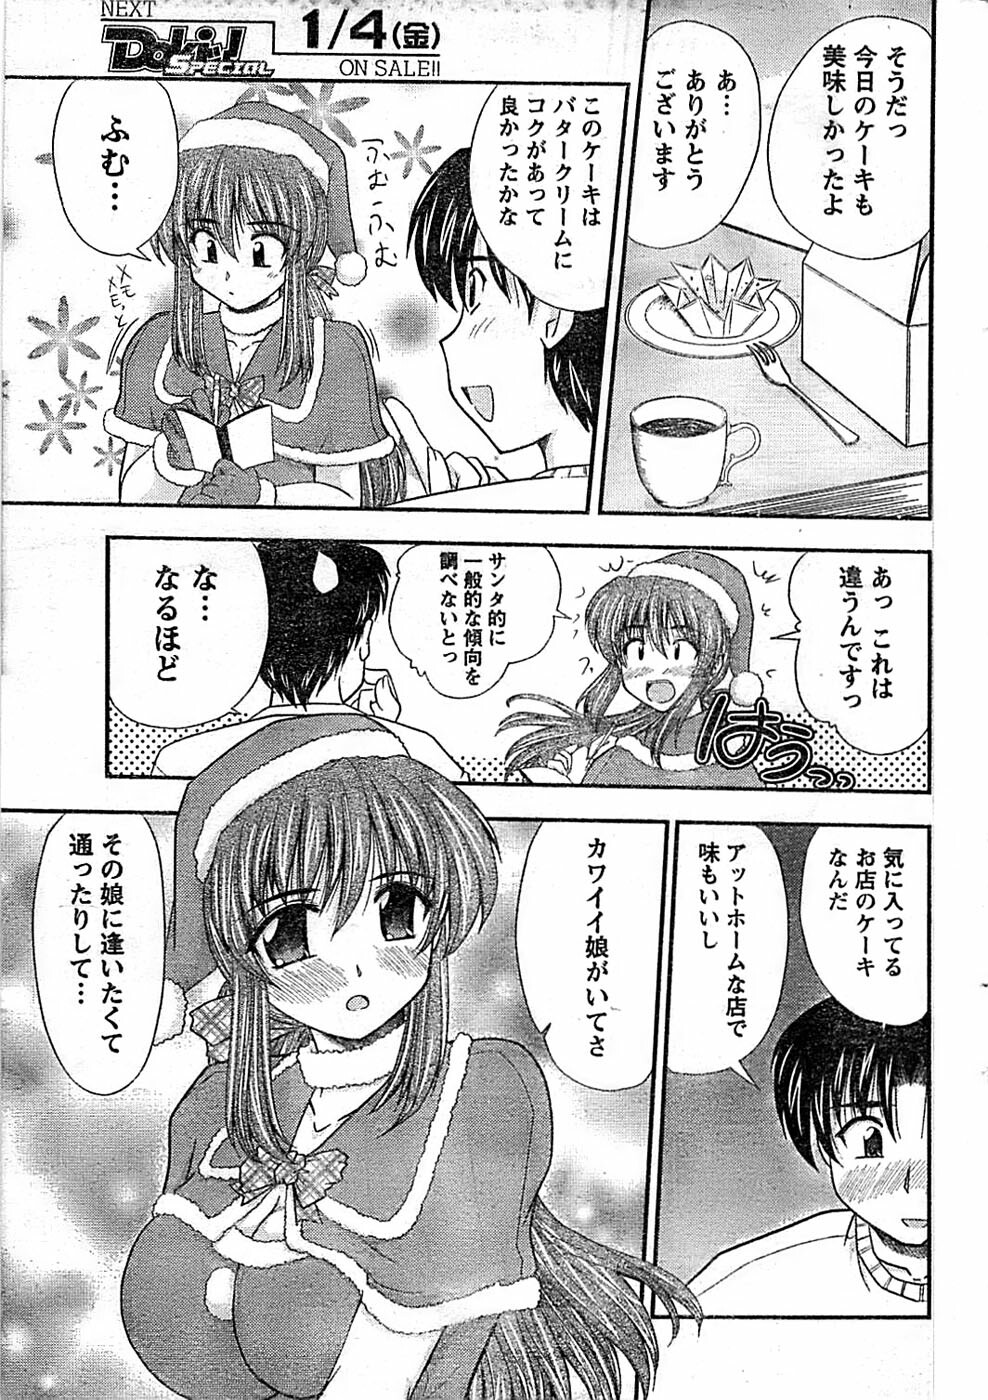 Doki! Special 2008-01 page 21 full